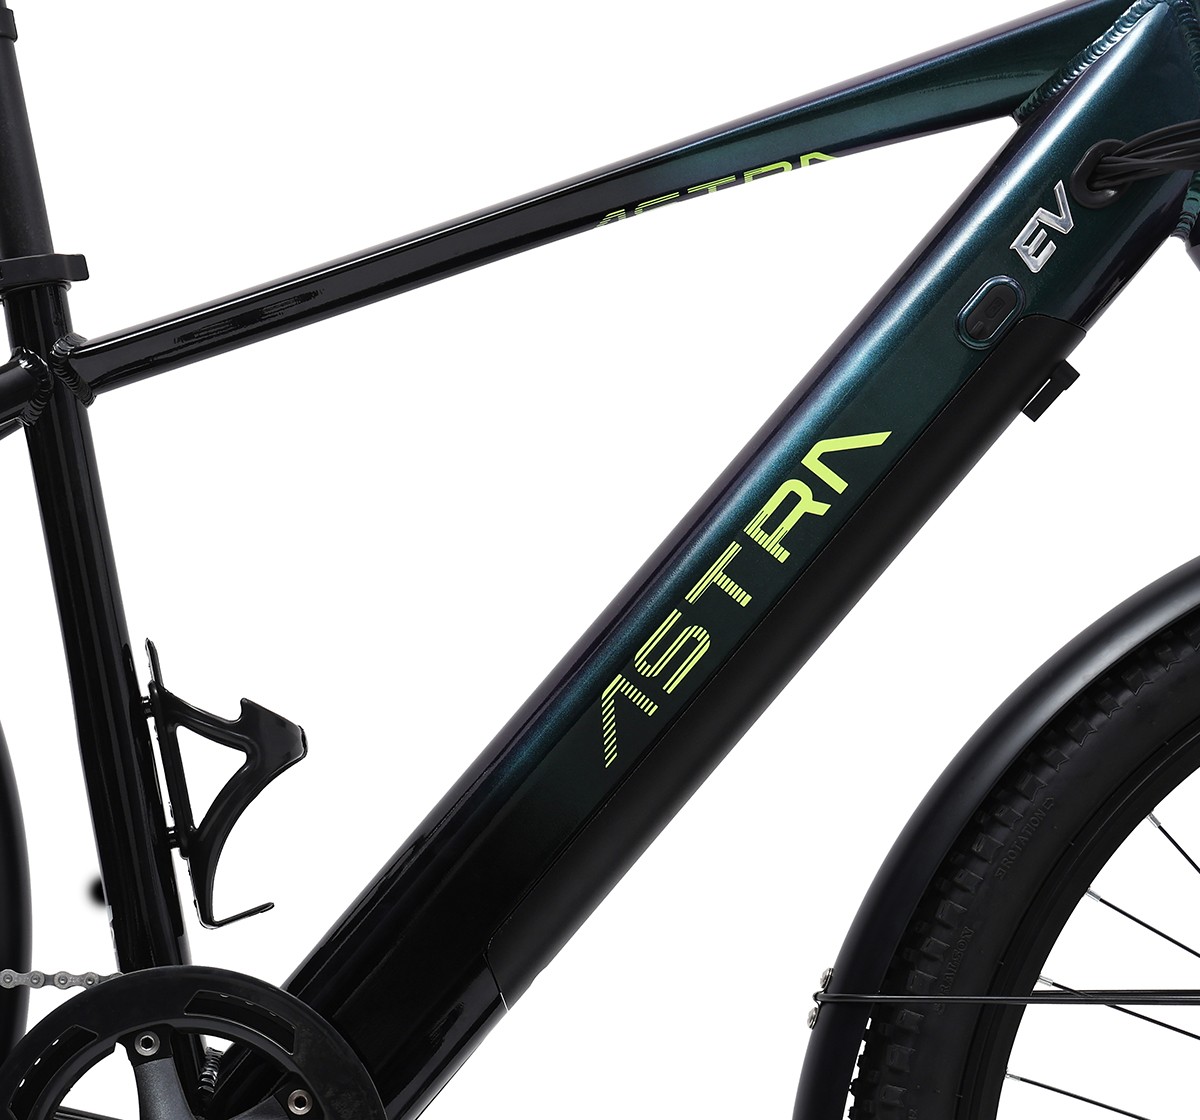 Astra 27.5 Inch 7S Magnatron E-bike, High Tensile Steel TIG Welded frame, Internal Cable Routing, 12Y+, Black